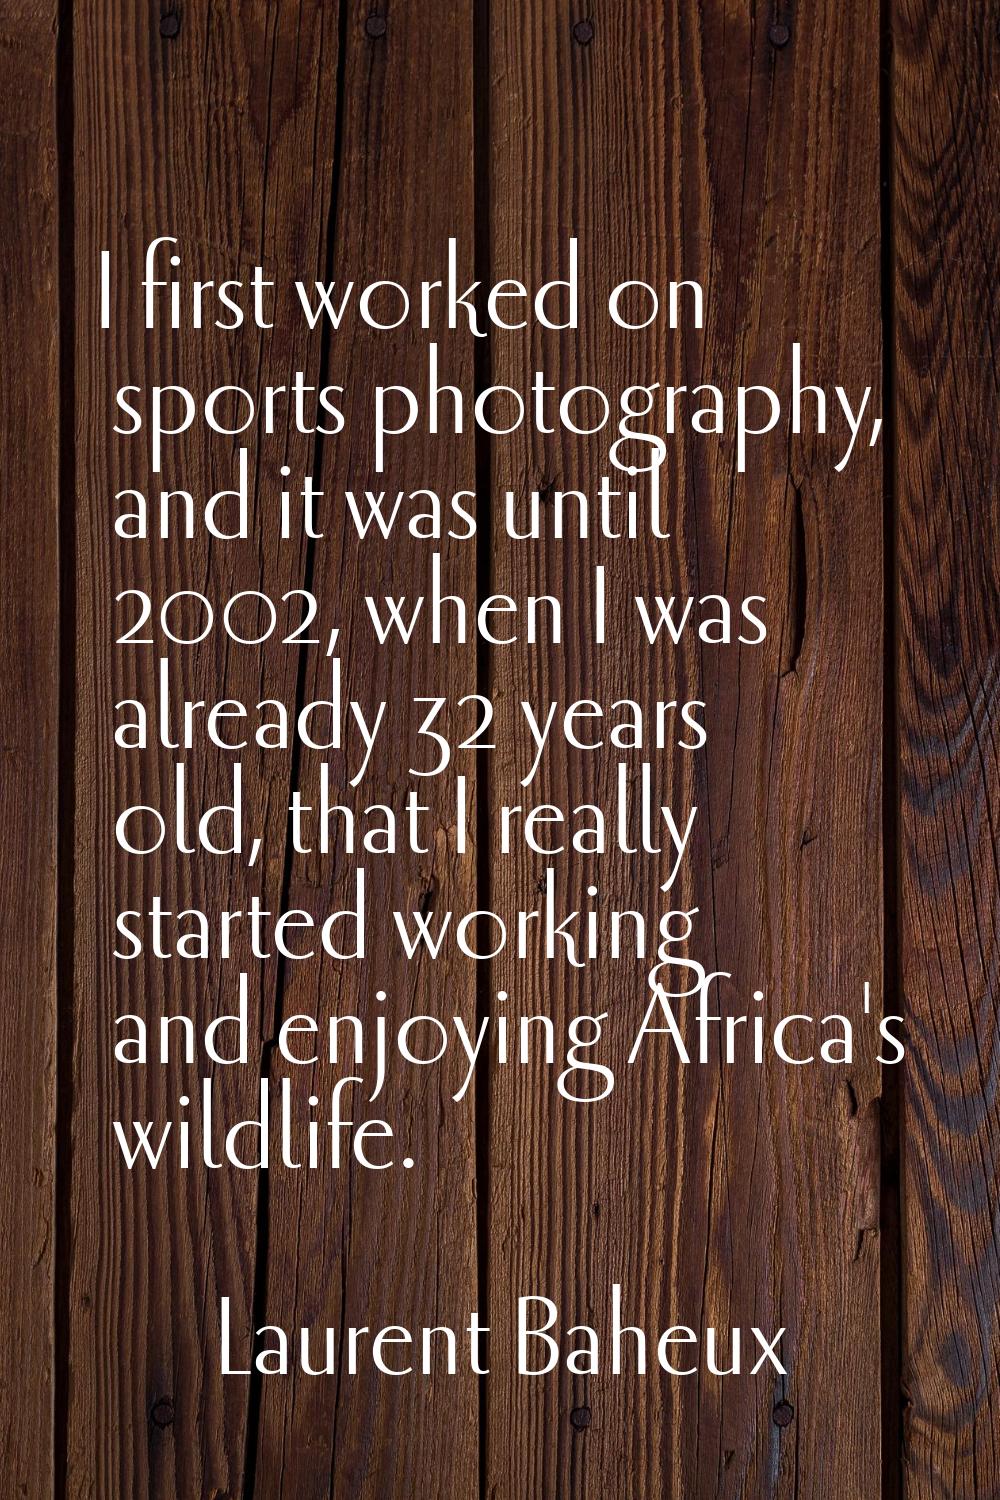 I first worked on sports photography, and it was until 2002, when I was already 32 years old, that 